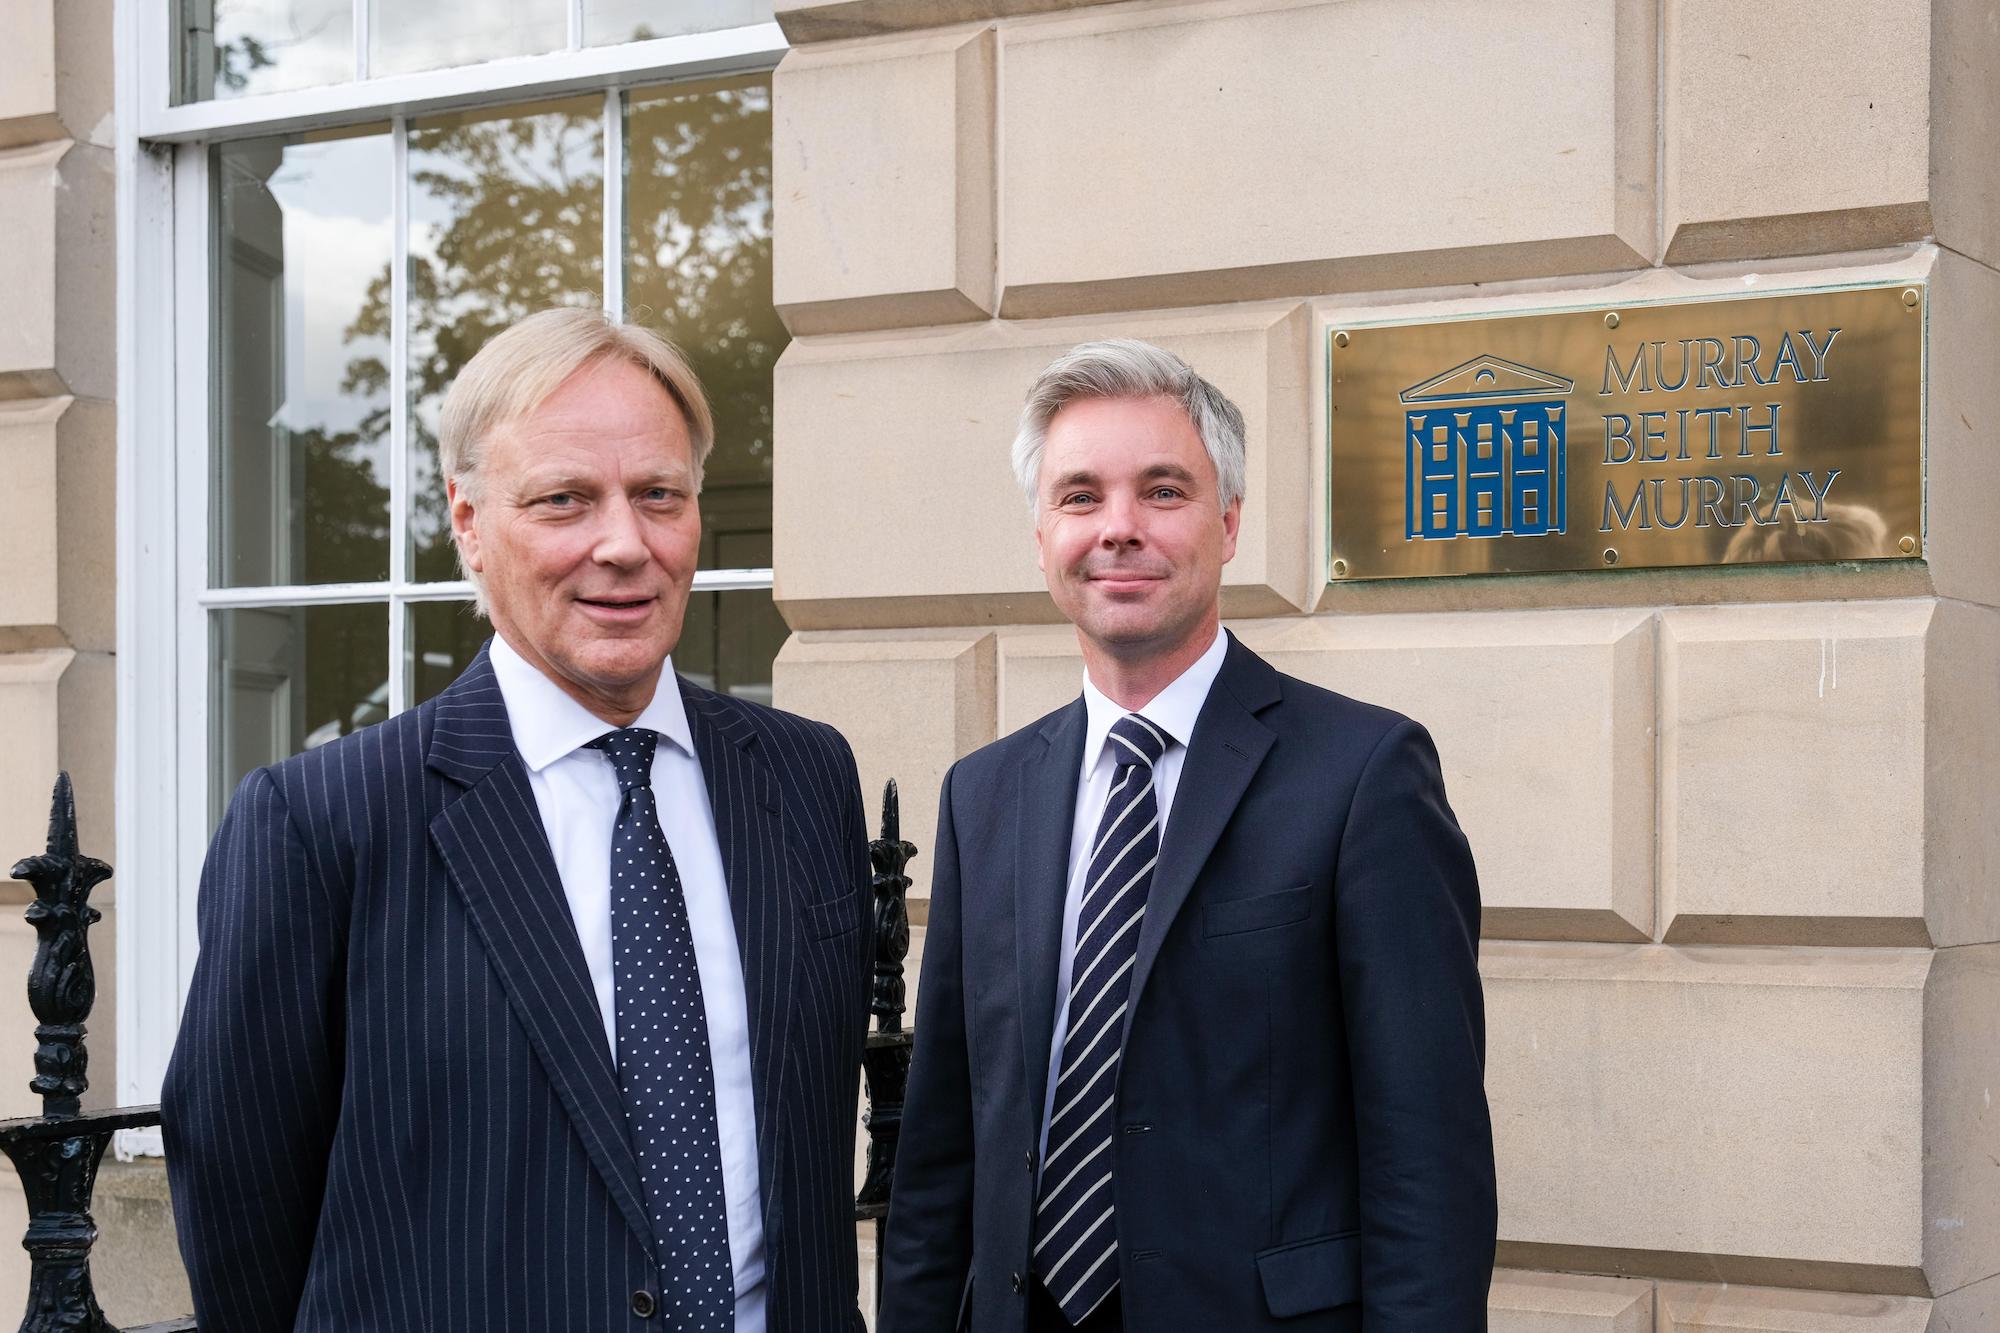 Murray Beith Murray names new asset protection and estate planning partner